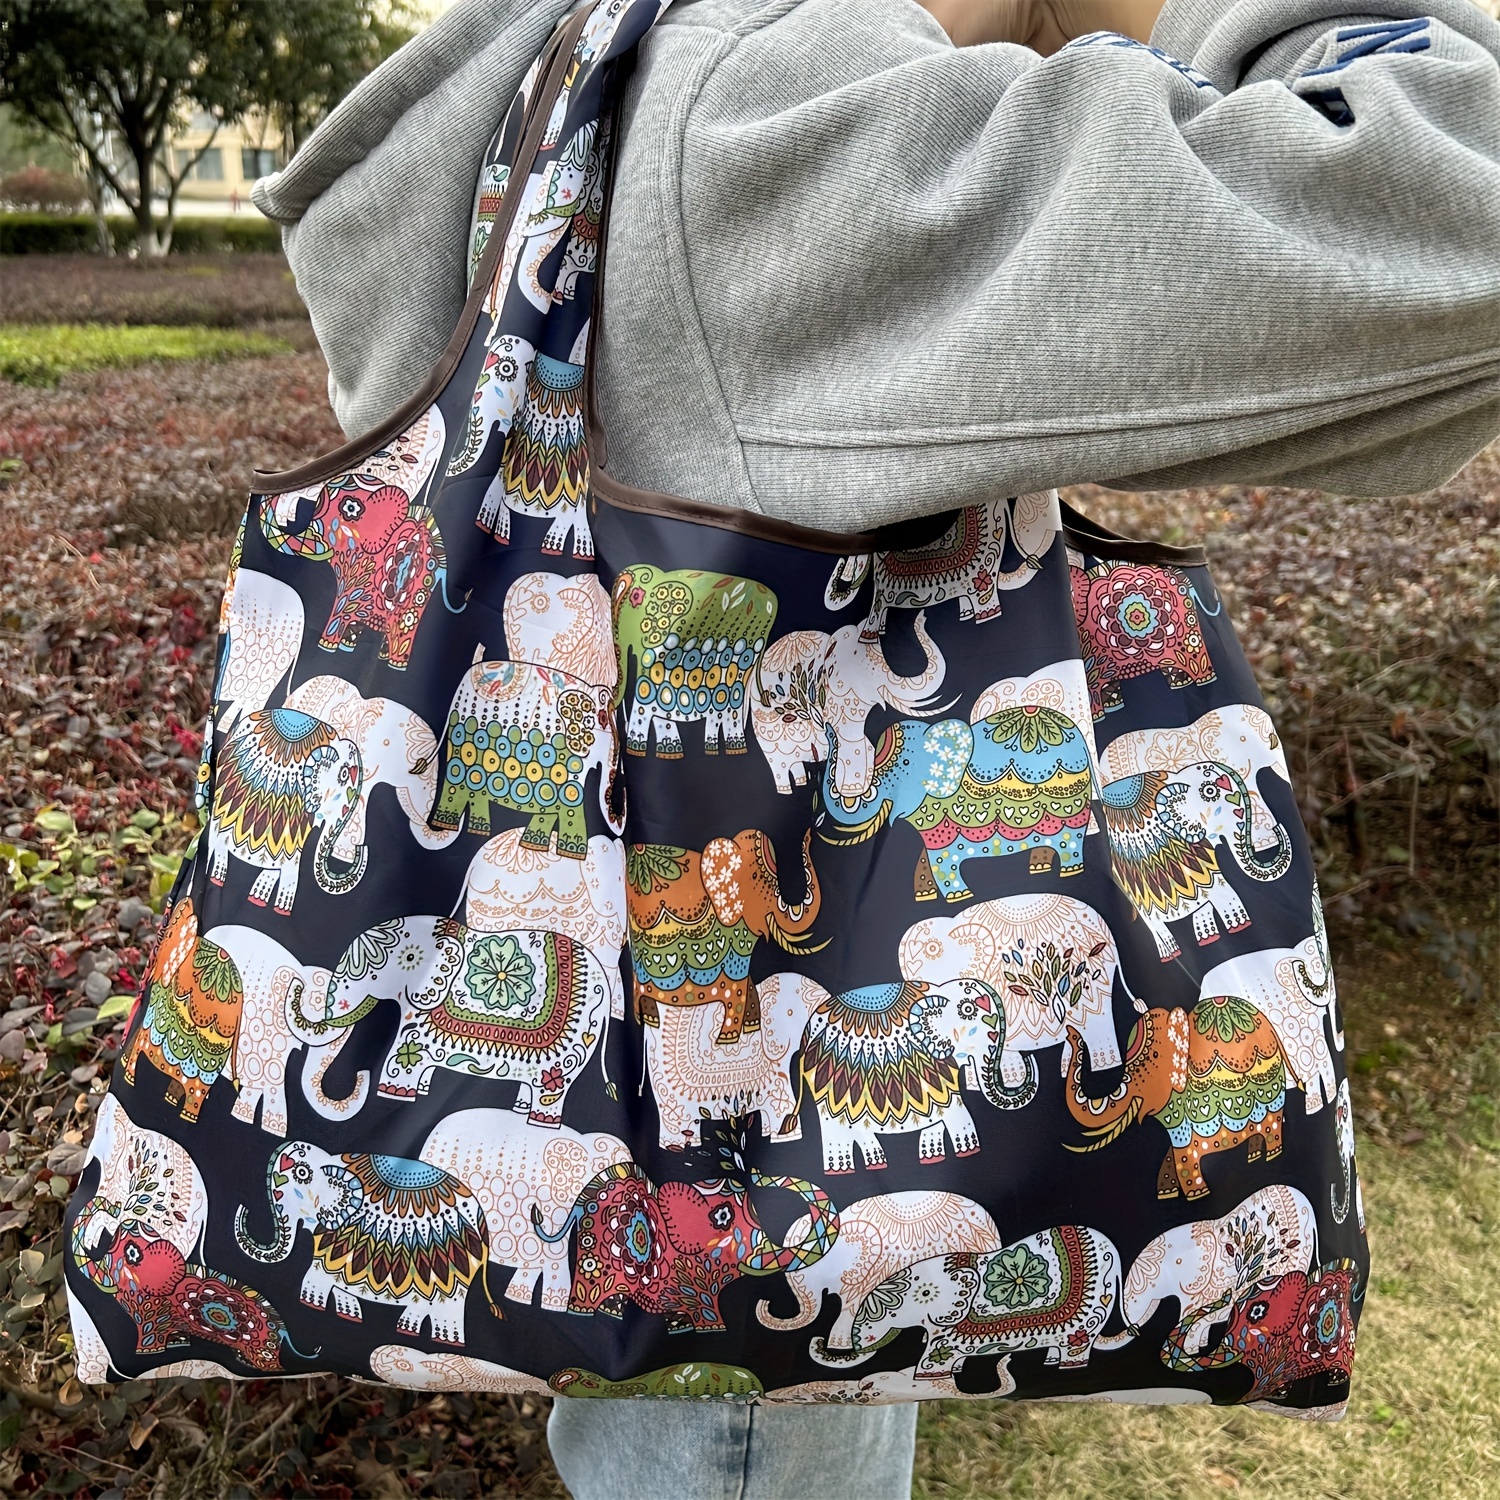 

Cartoon Elephant Print Large Capacity Portable Shopping Bag, Reusable Lightweight Soft Tote Bag, Foldable Portable Shoulder Handbag, Casual Daypack For Going Out